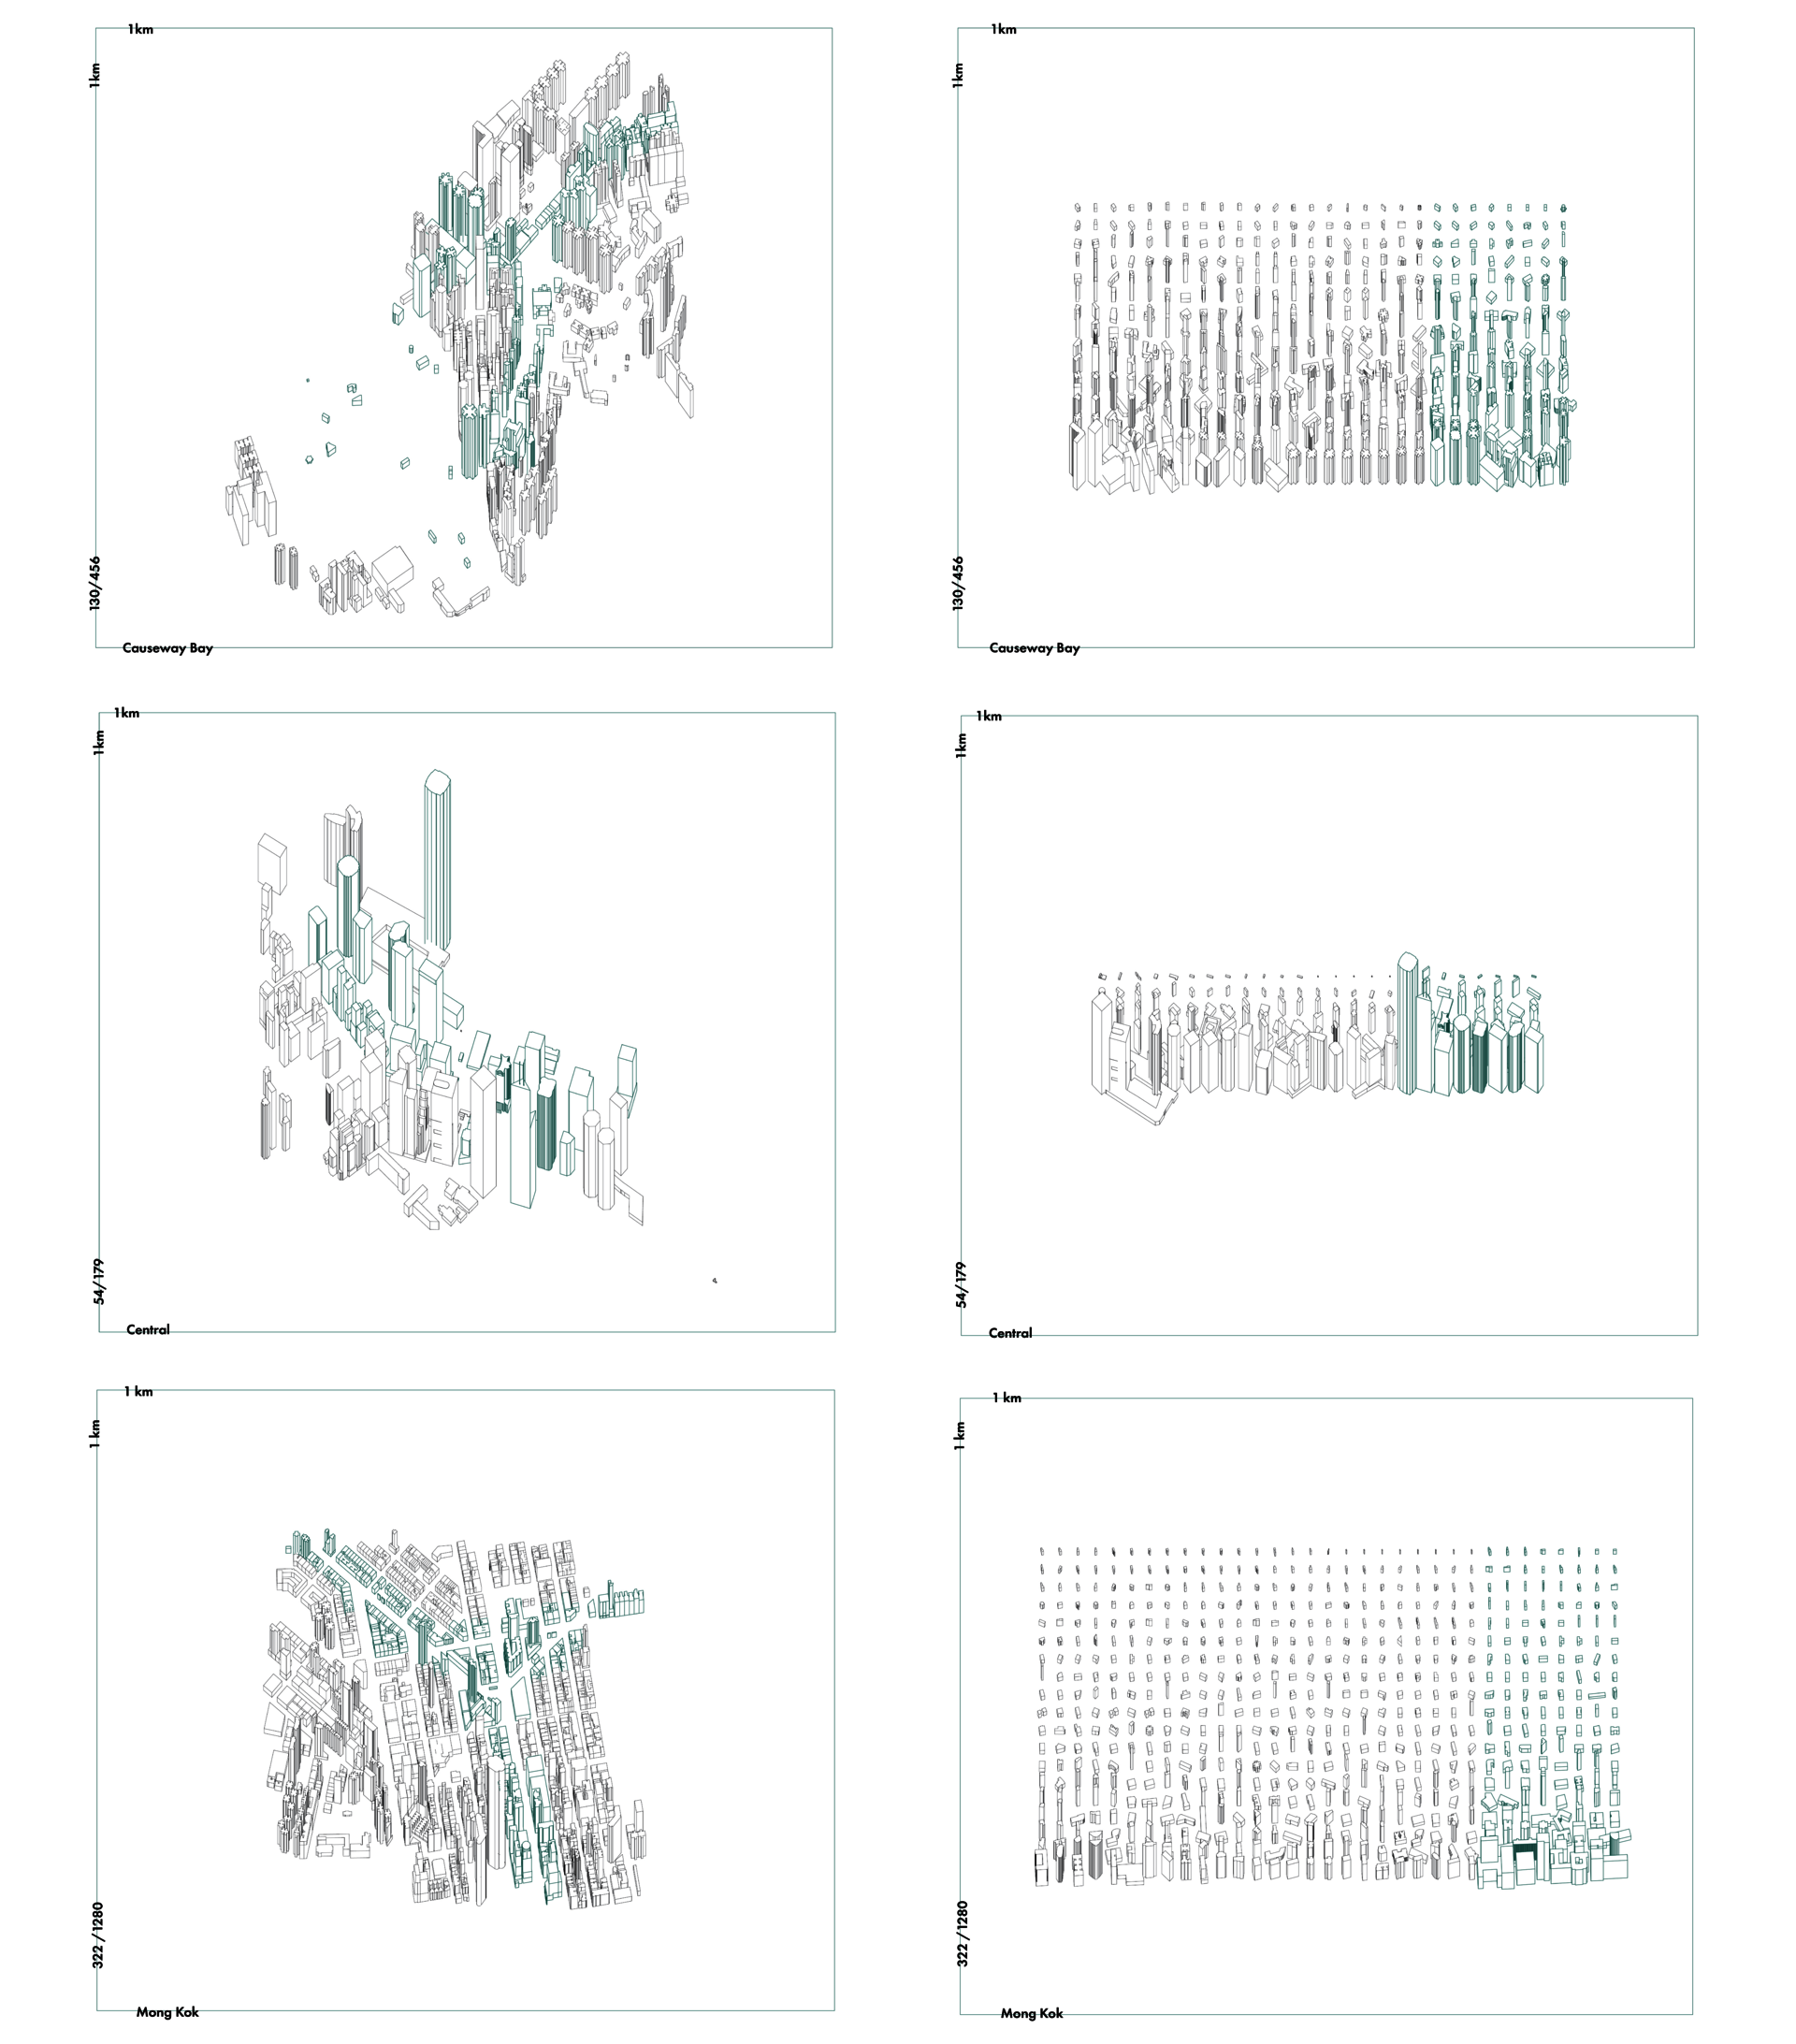 characteristics of each community in spatial relationshipa and ratios and how it defines the closeness to private space due to density